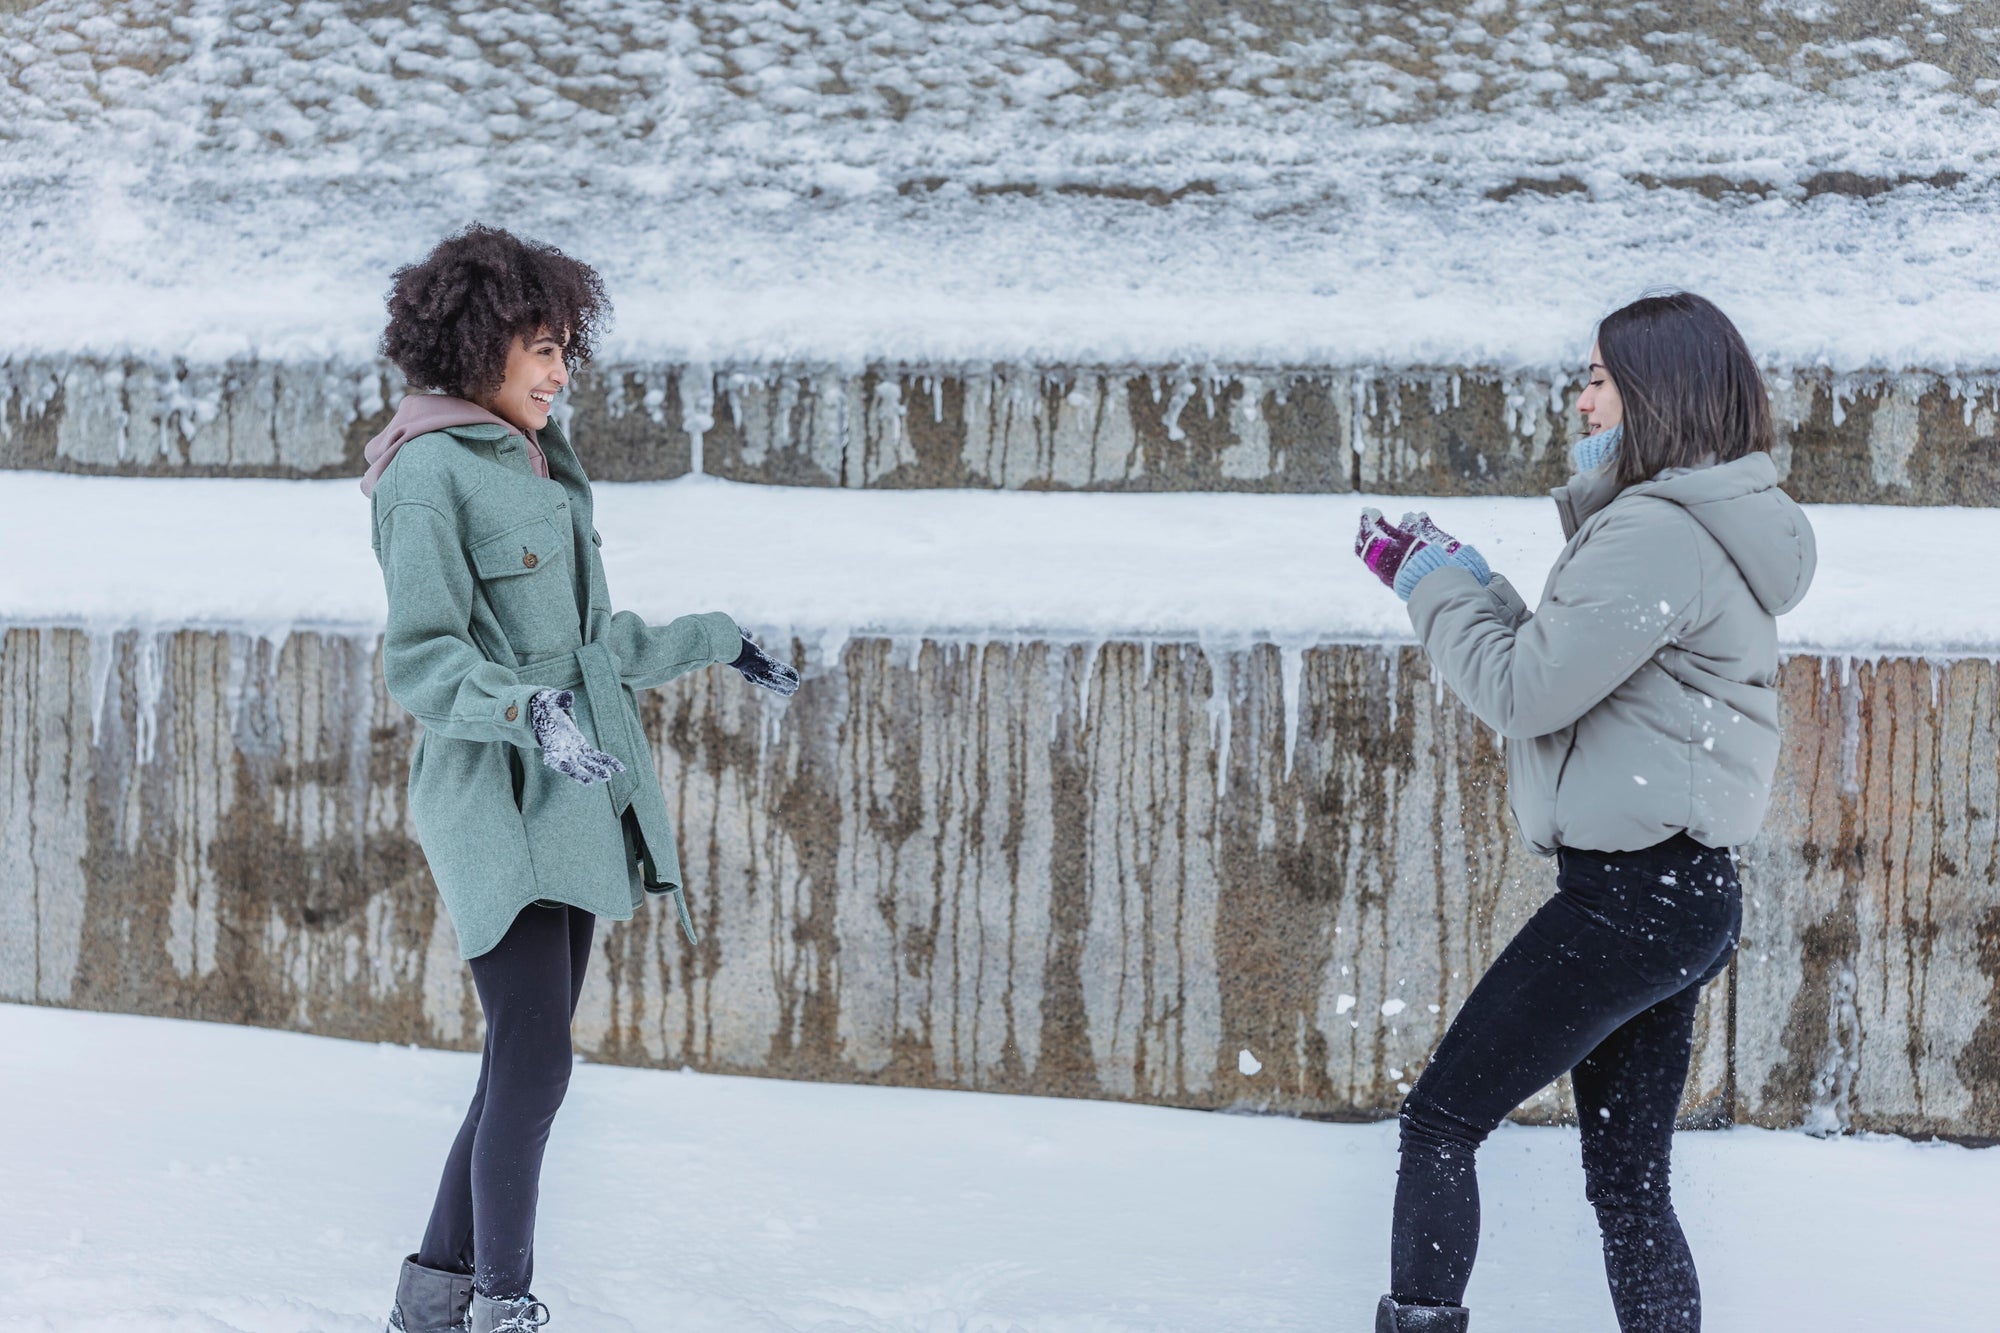 How To Host and Set Up a Snowball Fight